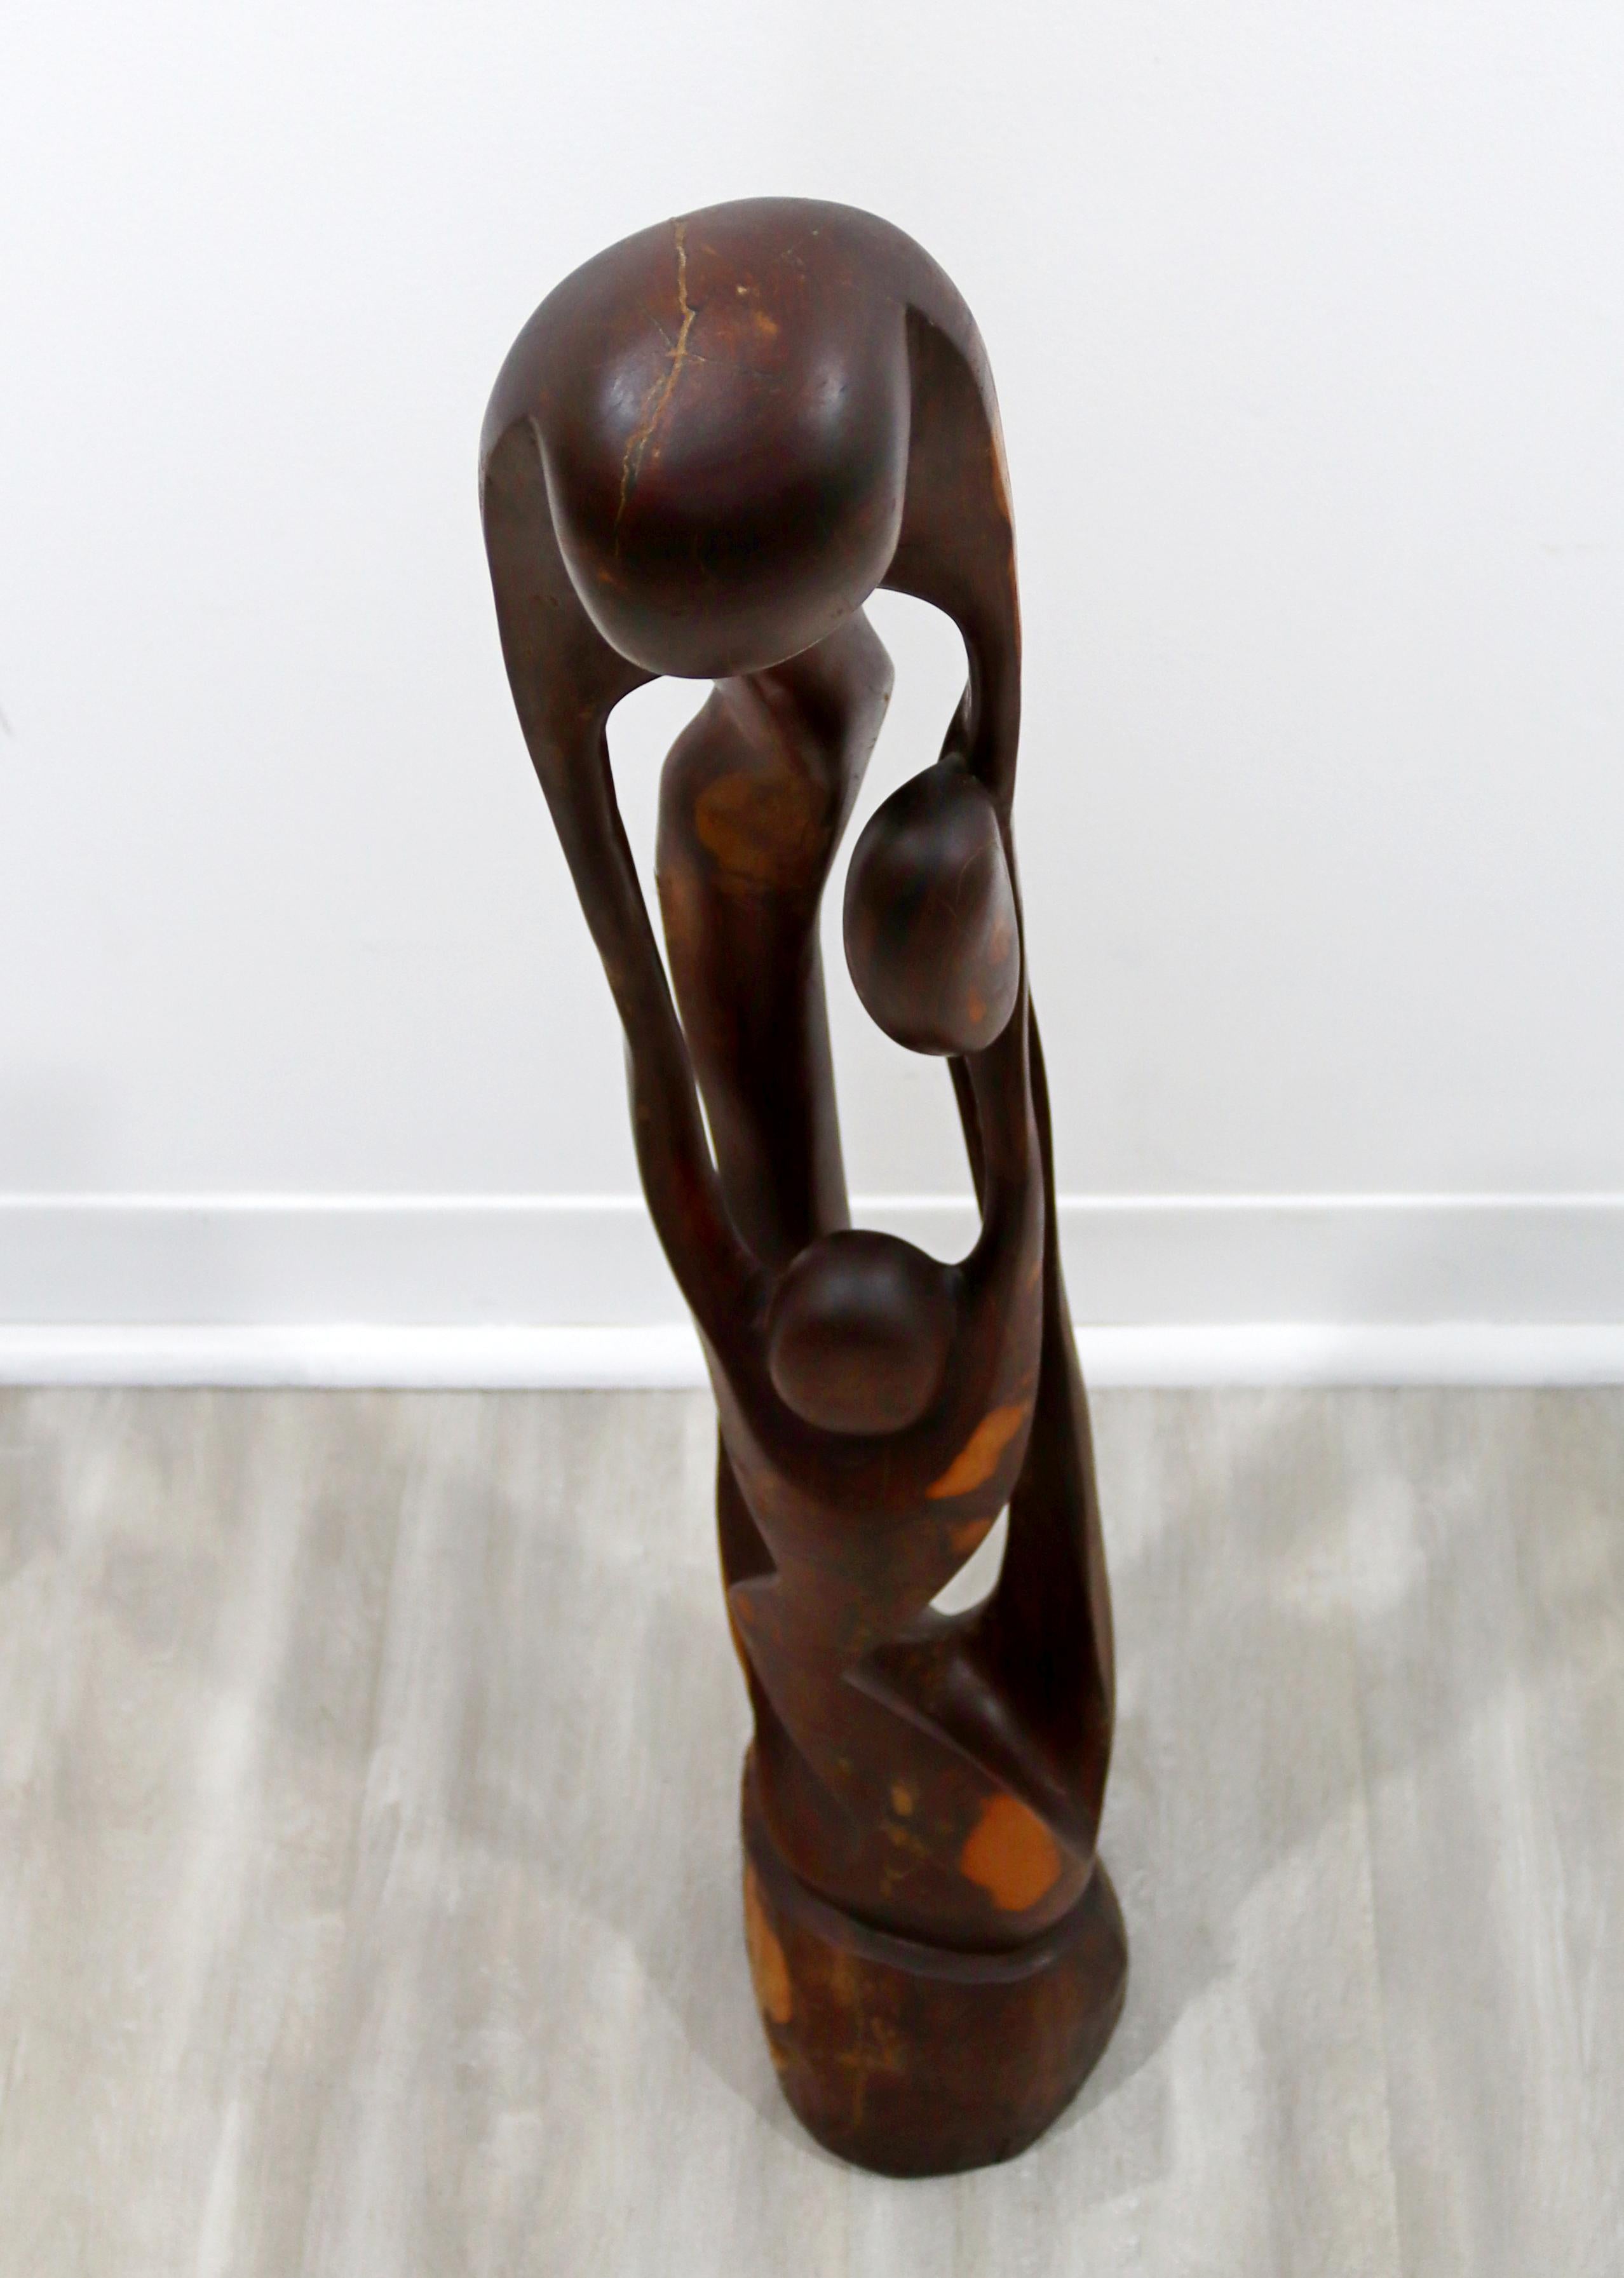 For your consideration is a beautiful, wood carved sculpture or statue of abstracted figures. In excellent vintage condition. The dimensions are 5